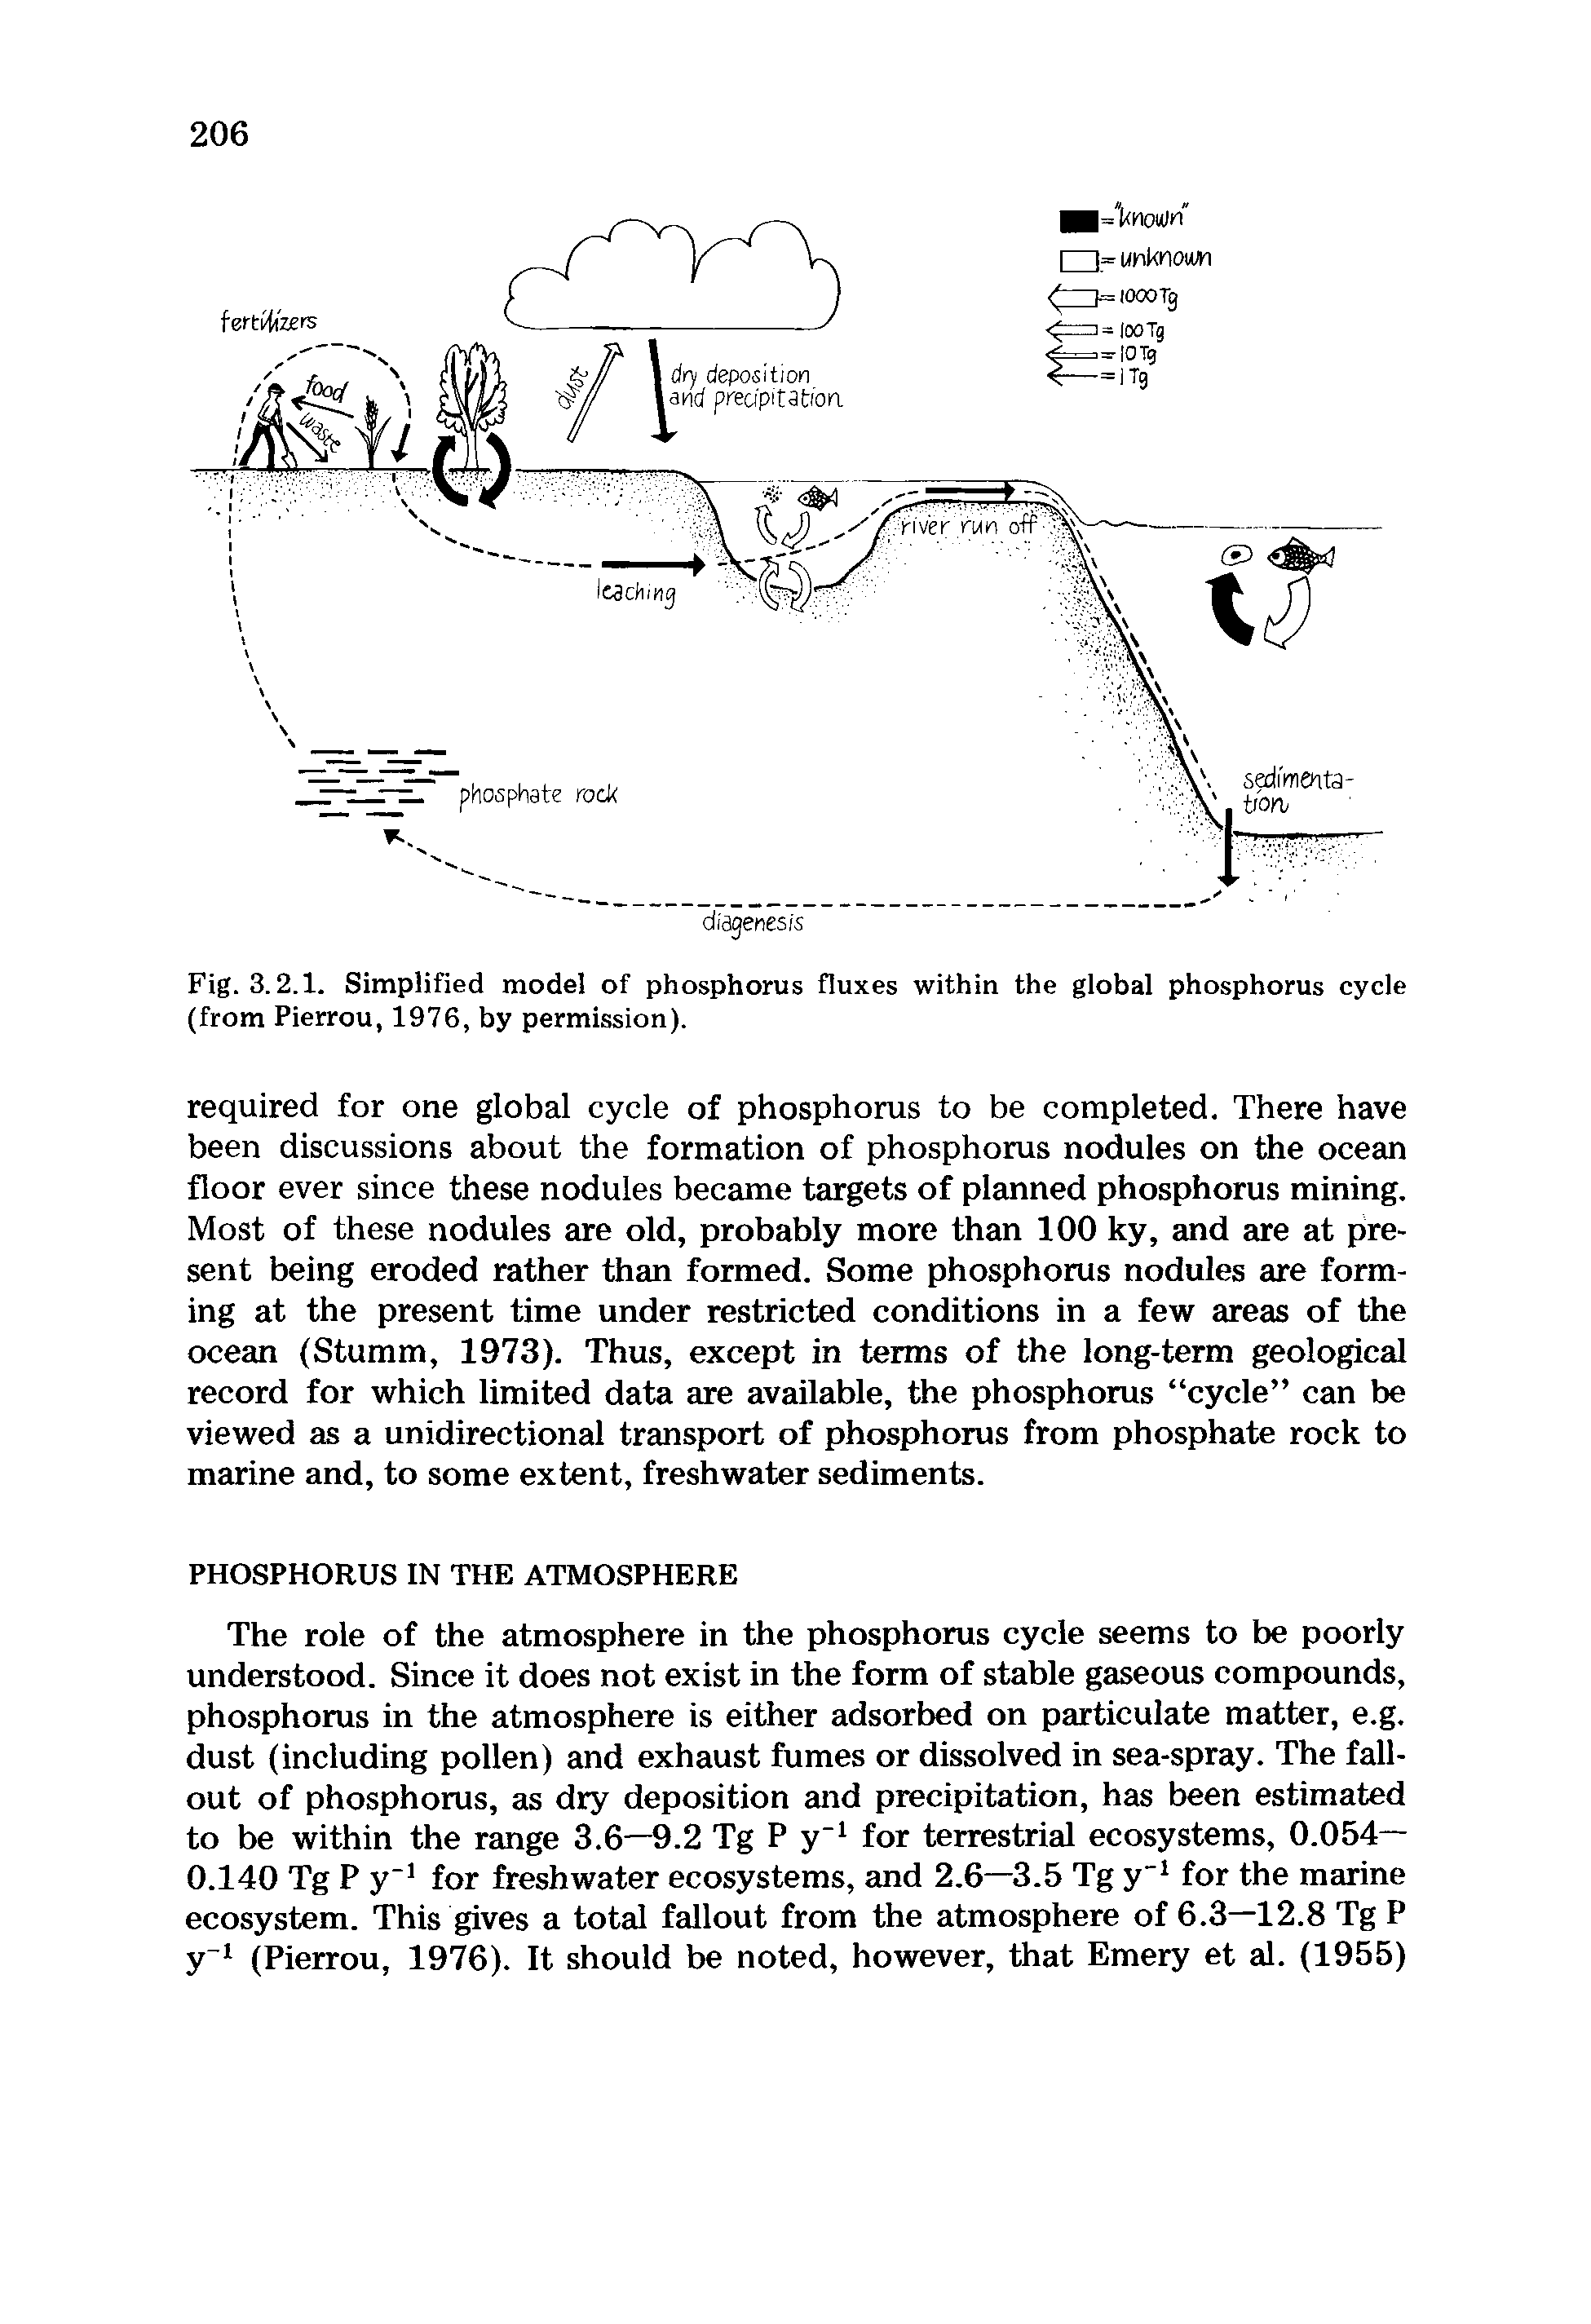 Fig. 3.2.1. Simplified model of phosphorus fluxes within the global phosphorus cycle (from Pierrou, 1976, by permission).